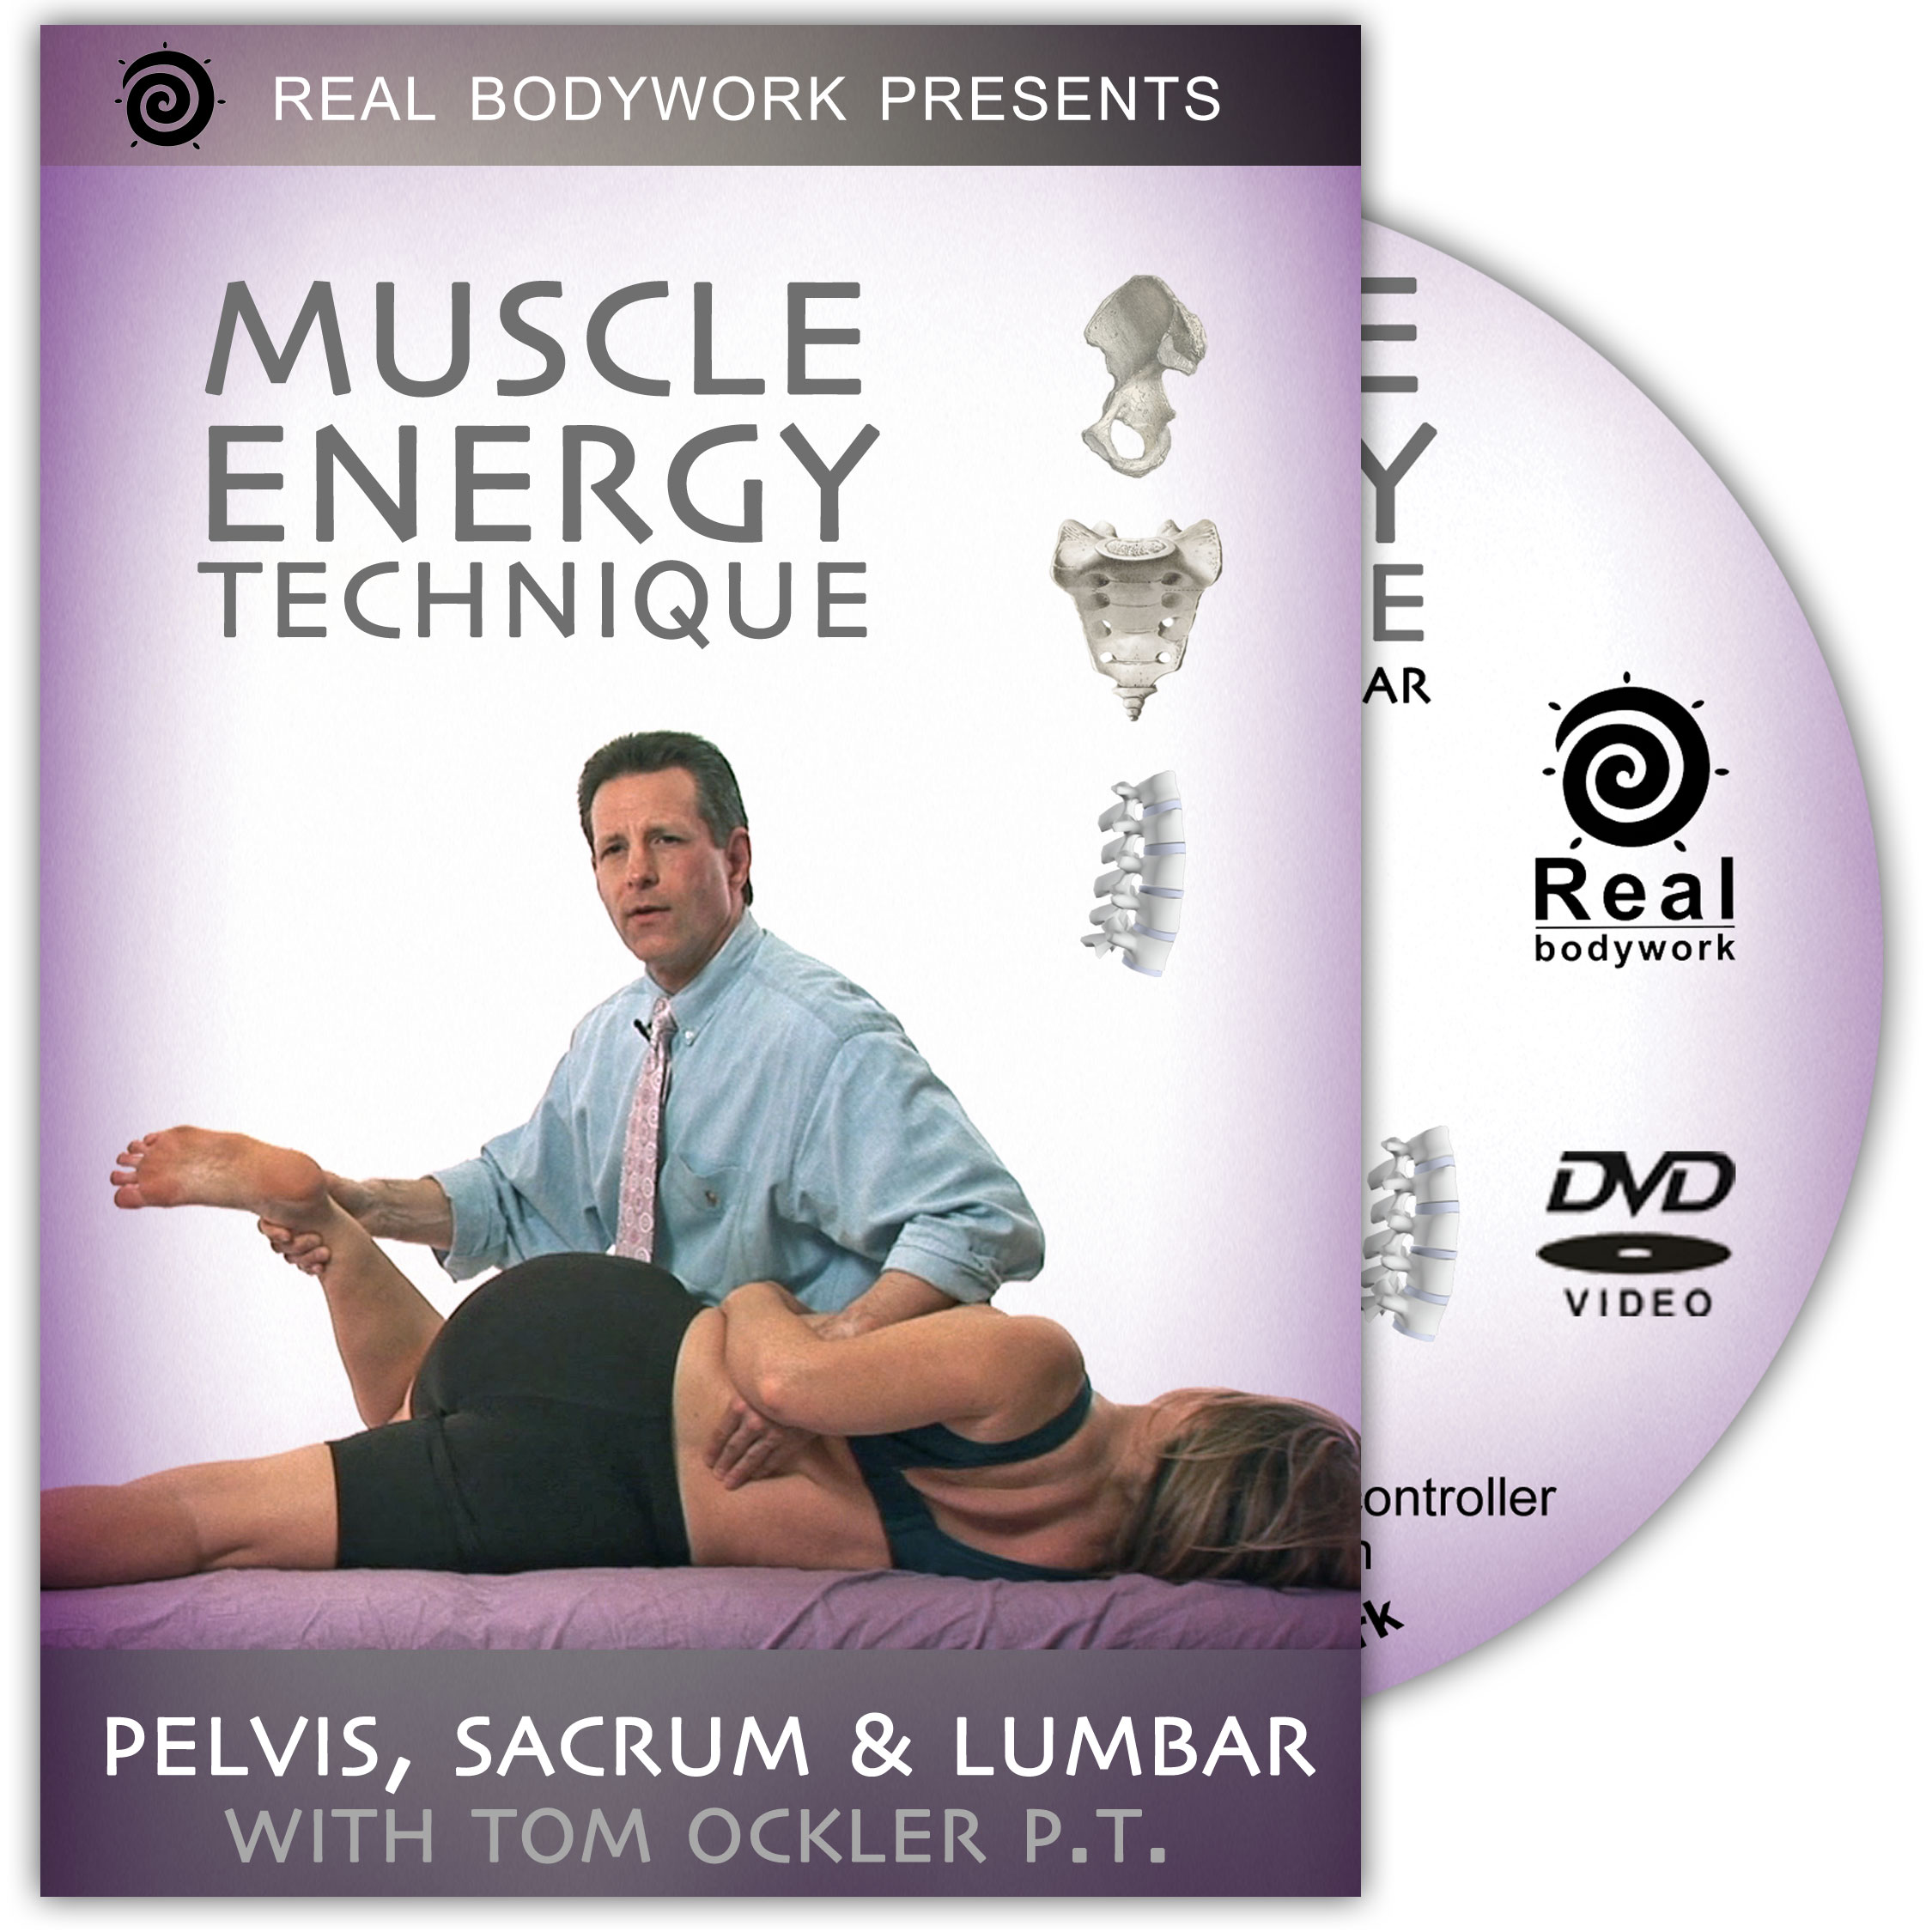 Muscle Energy Technique for the pelvis, sacrum and lumbar DVD - Real